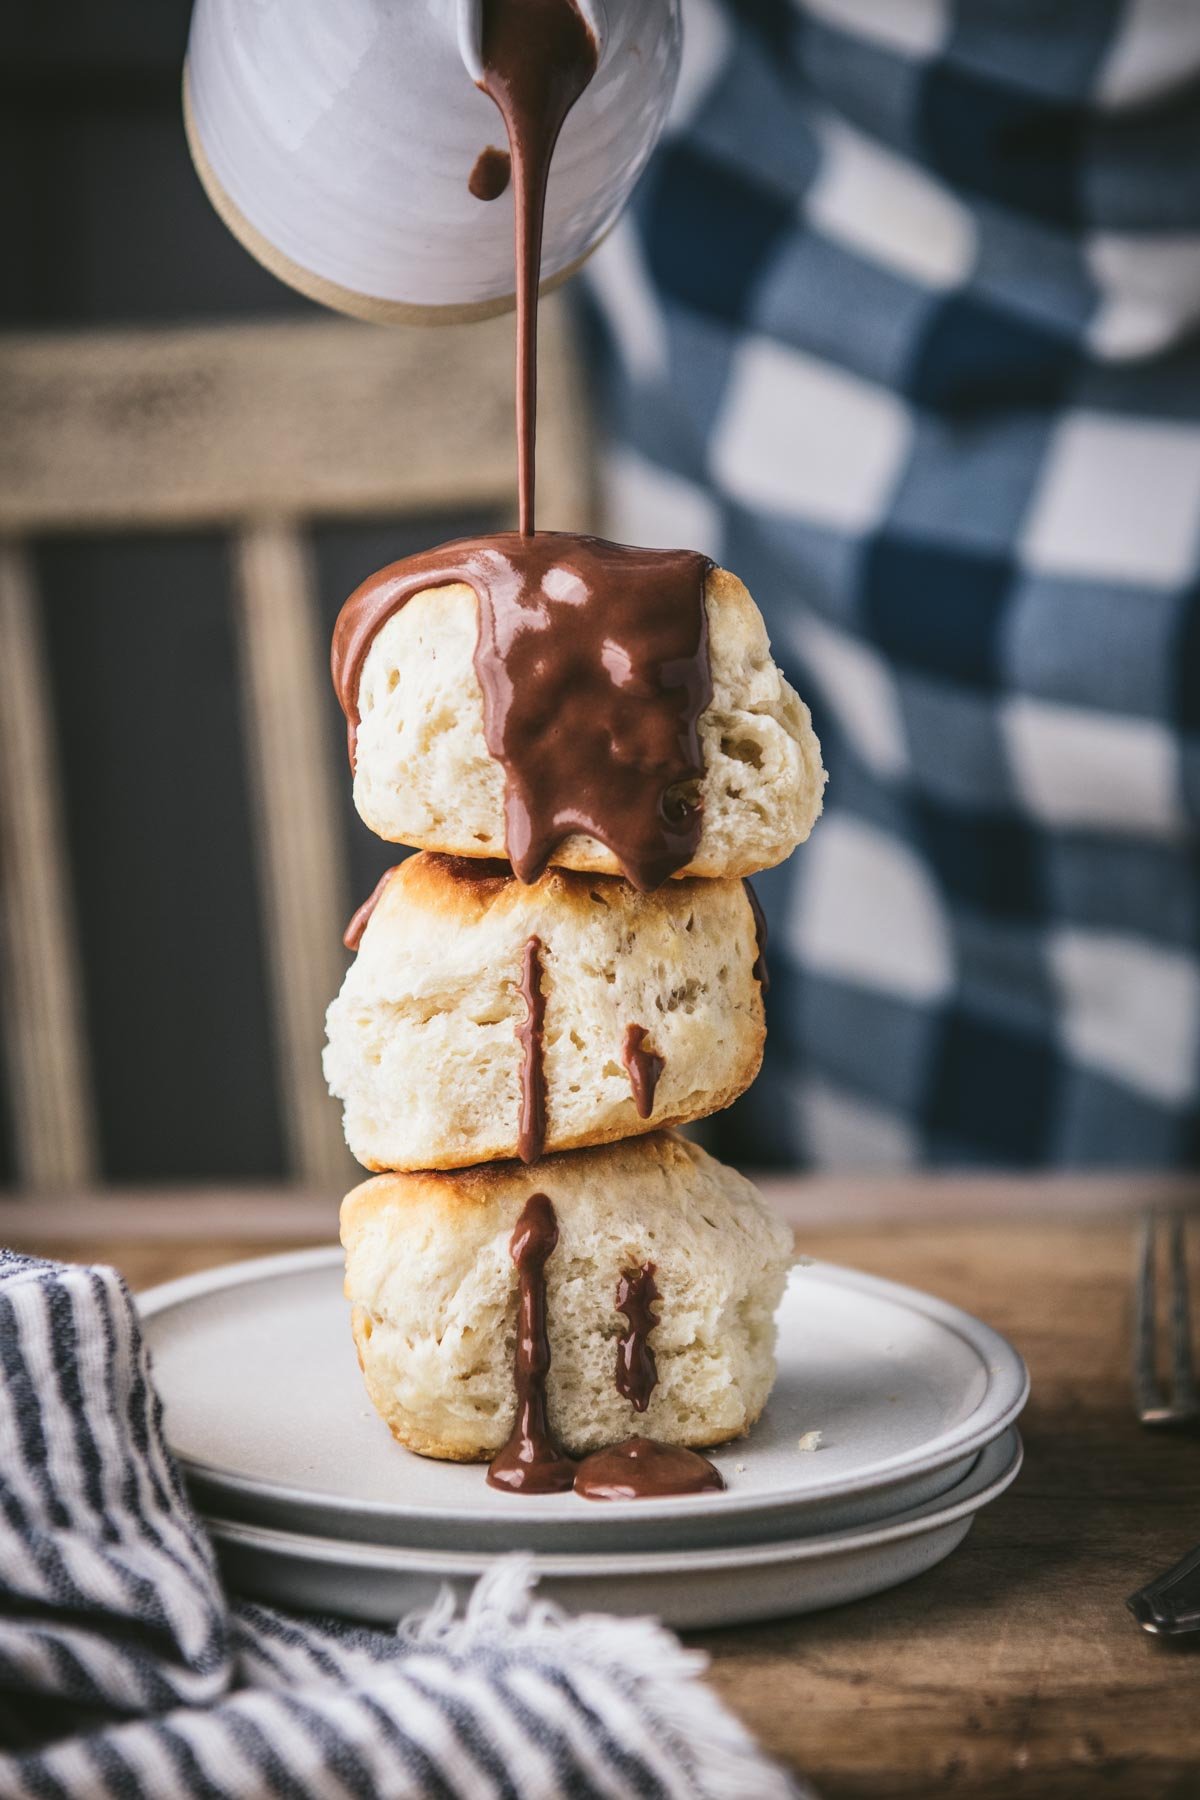 Drizzling chocolate gravy over a stack of biscuits